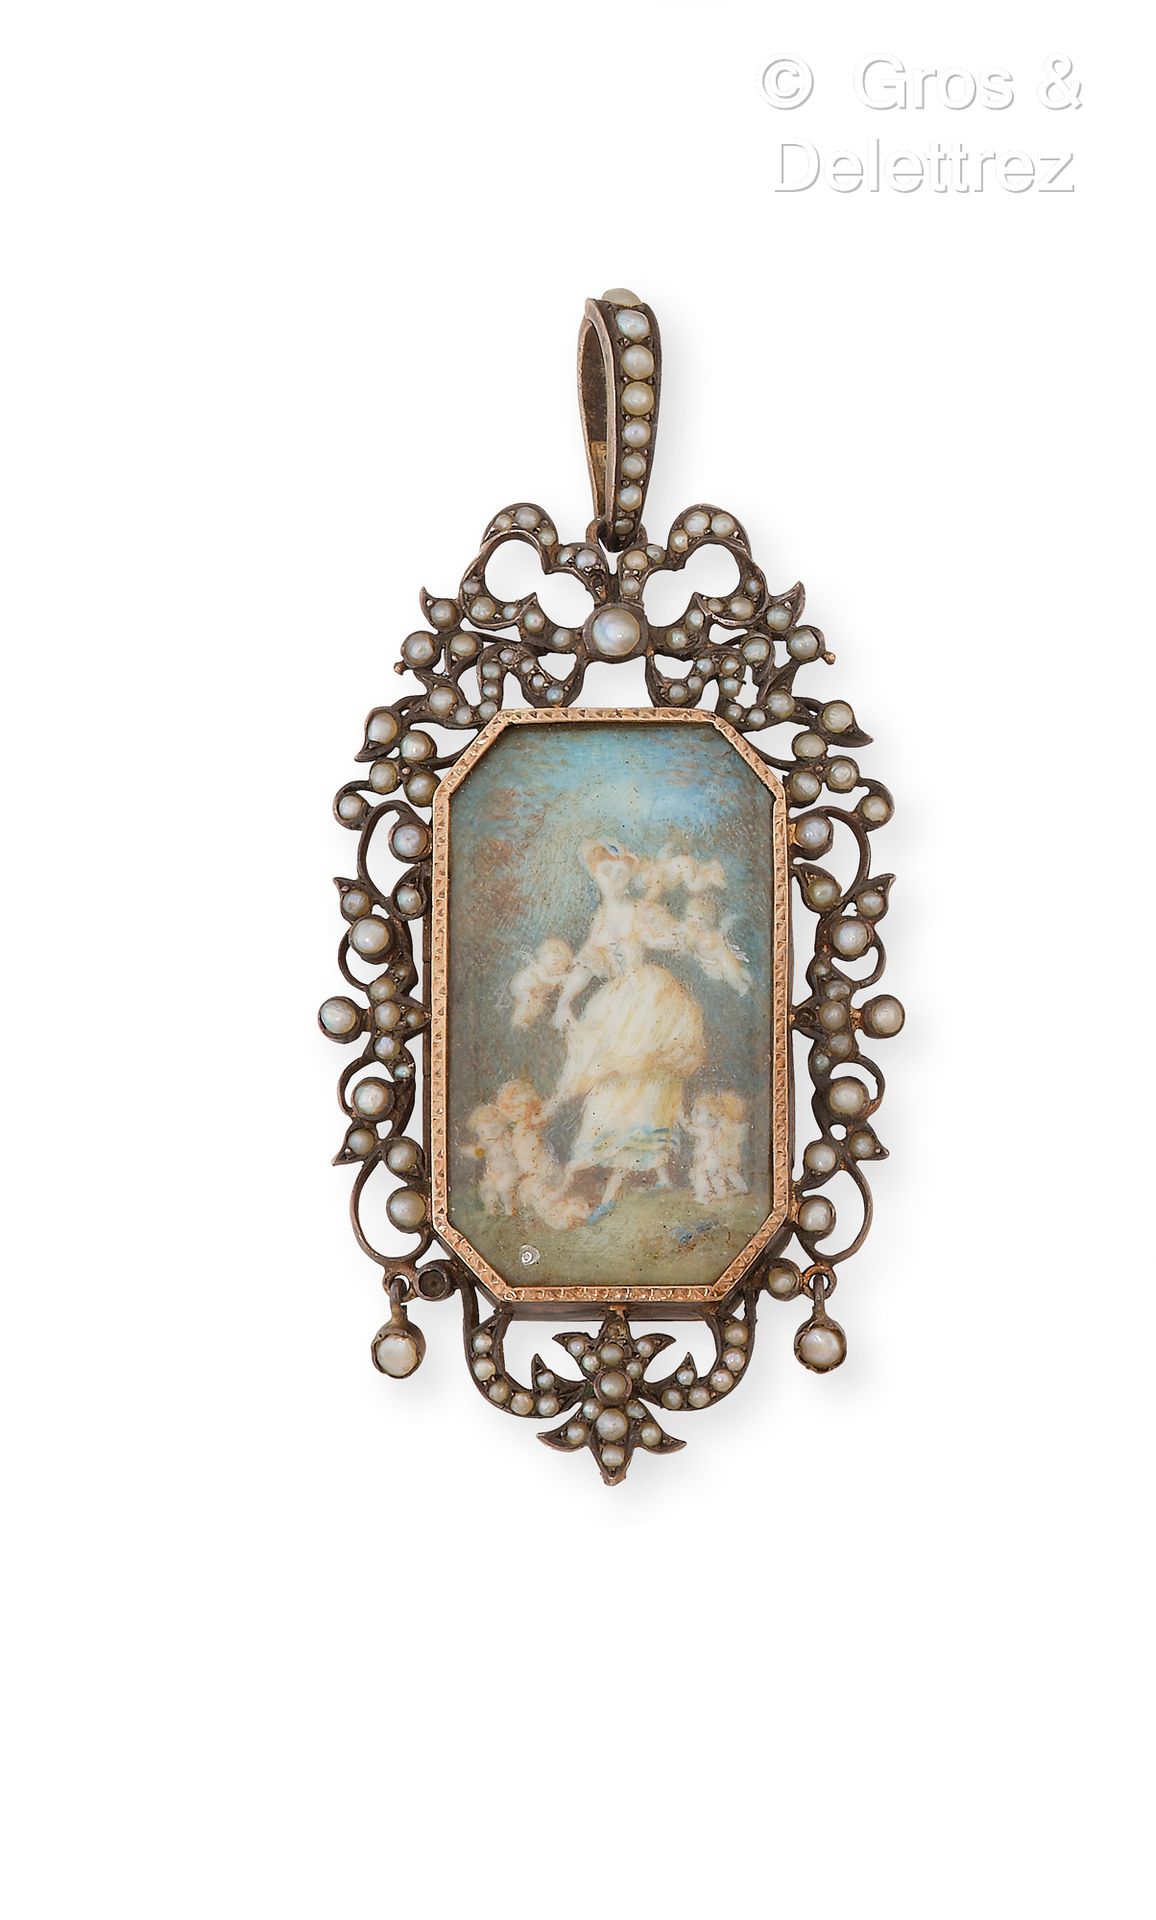 Null Pendant " Porte-souvenir " in silver, decorated with a miniature in a frame&hellip;